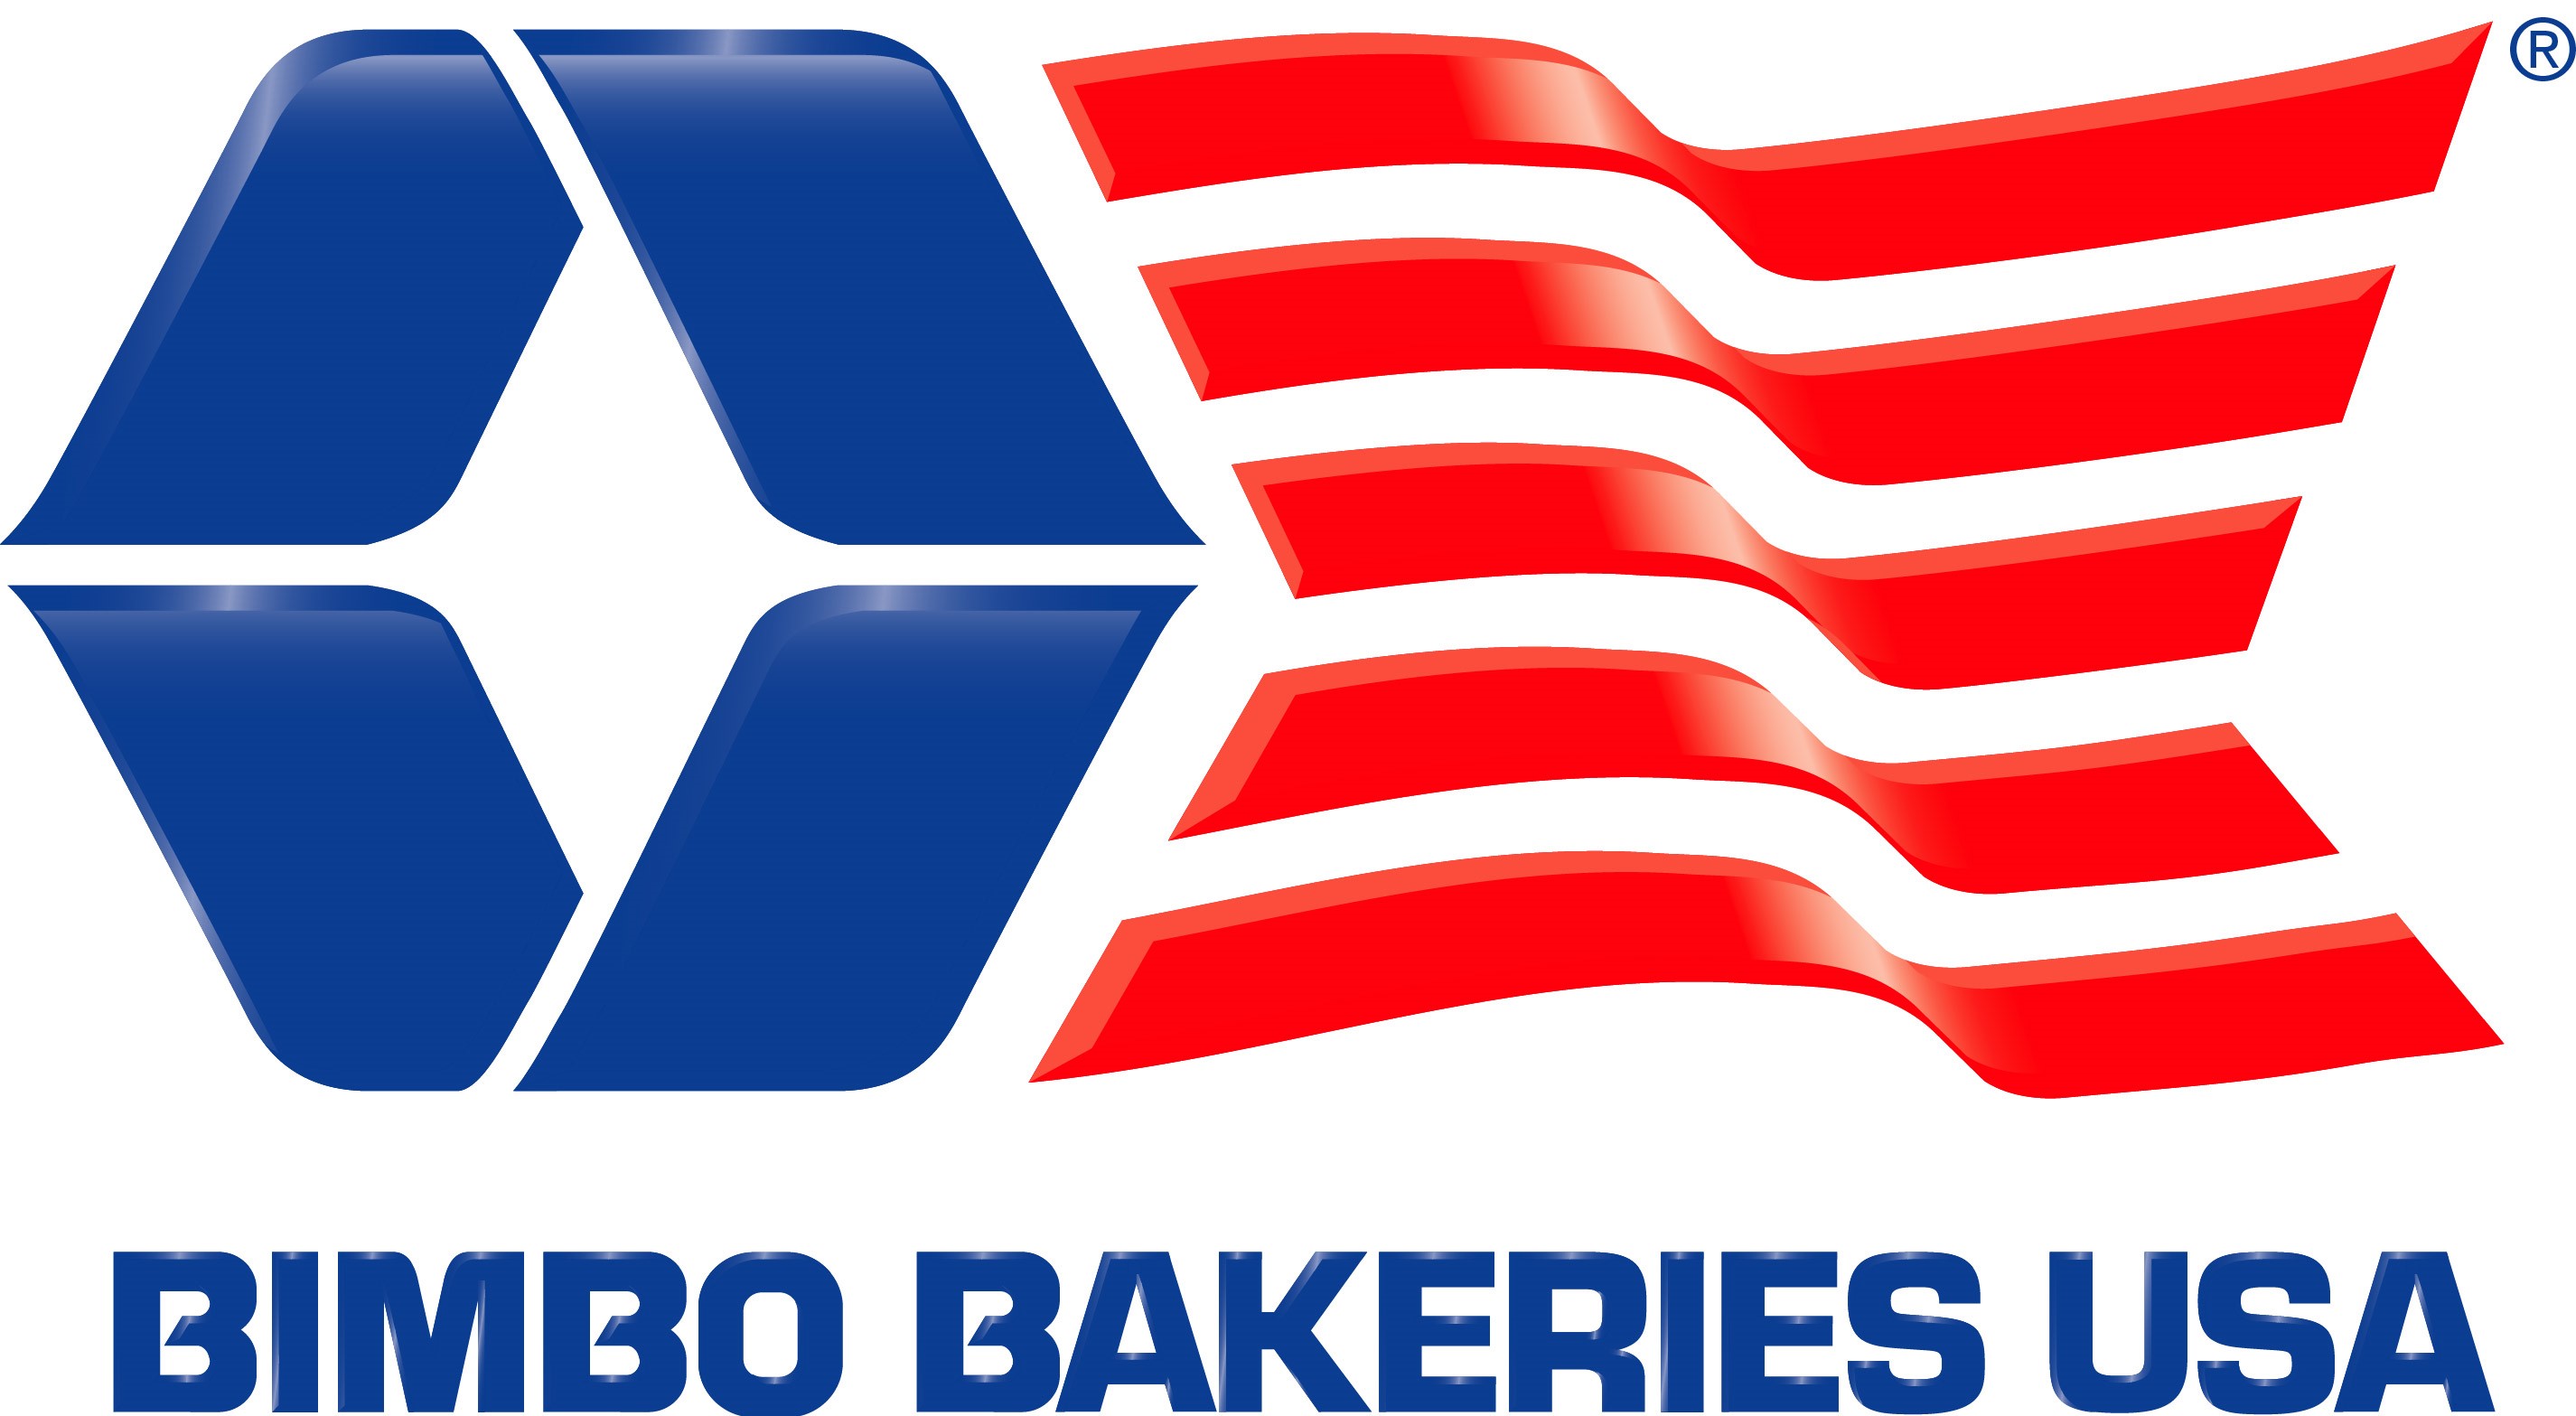 Bimbo Bakeries USA (BBU) is a leader in the baking industry, known for its category leading brands, innovative products, freshness and quality.